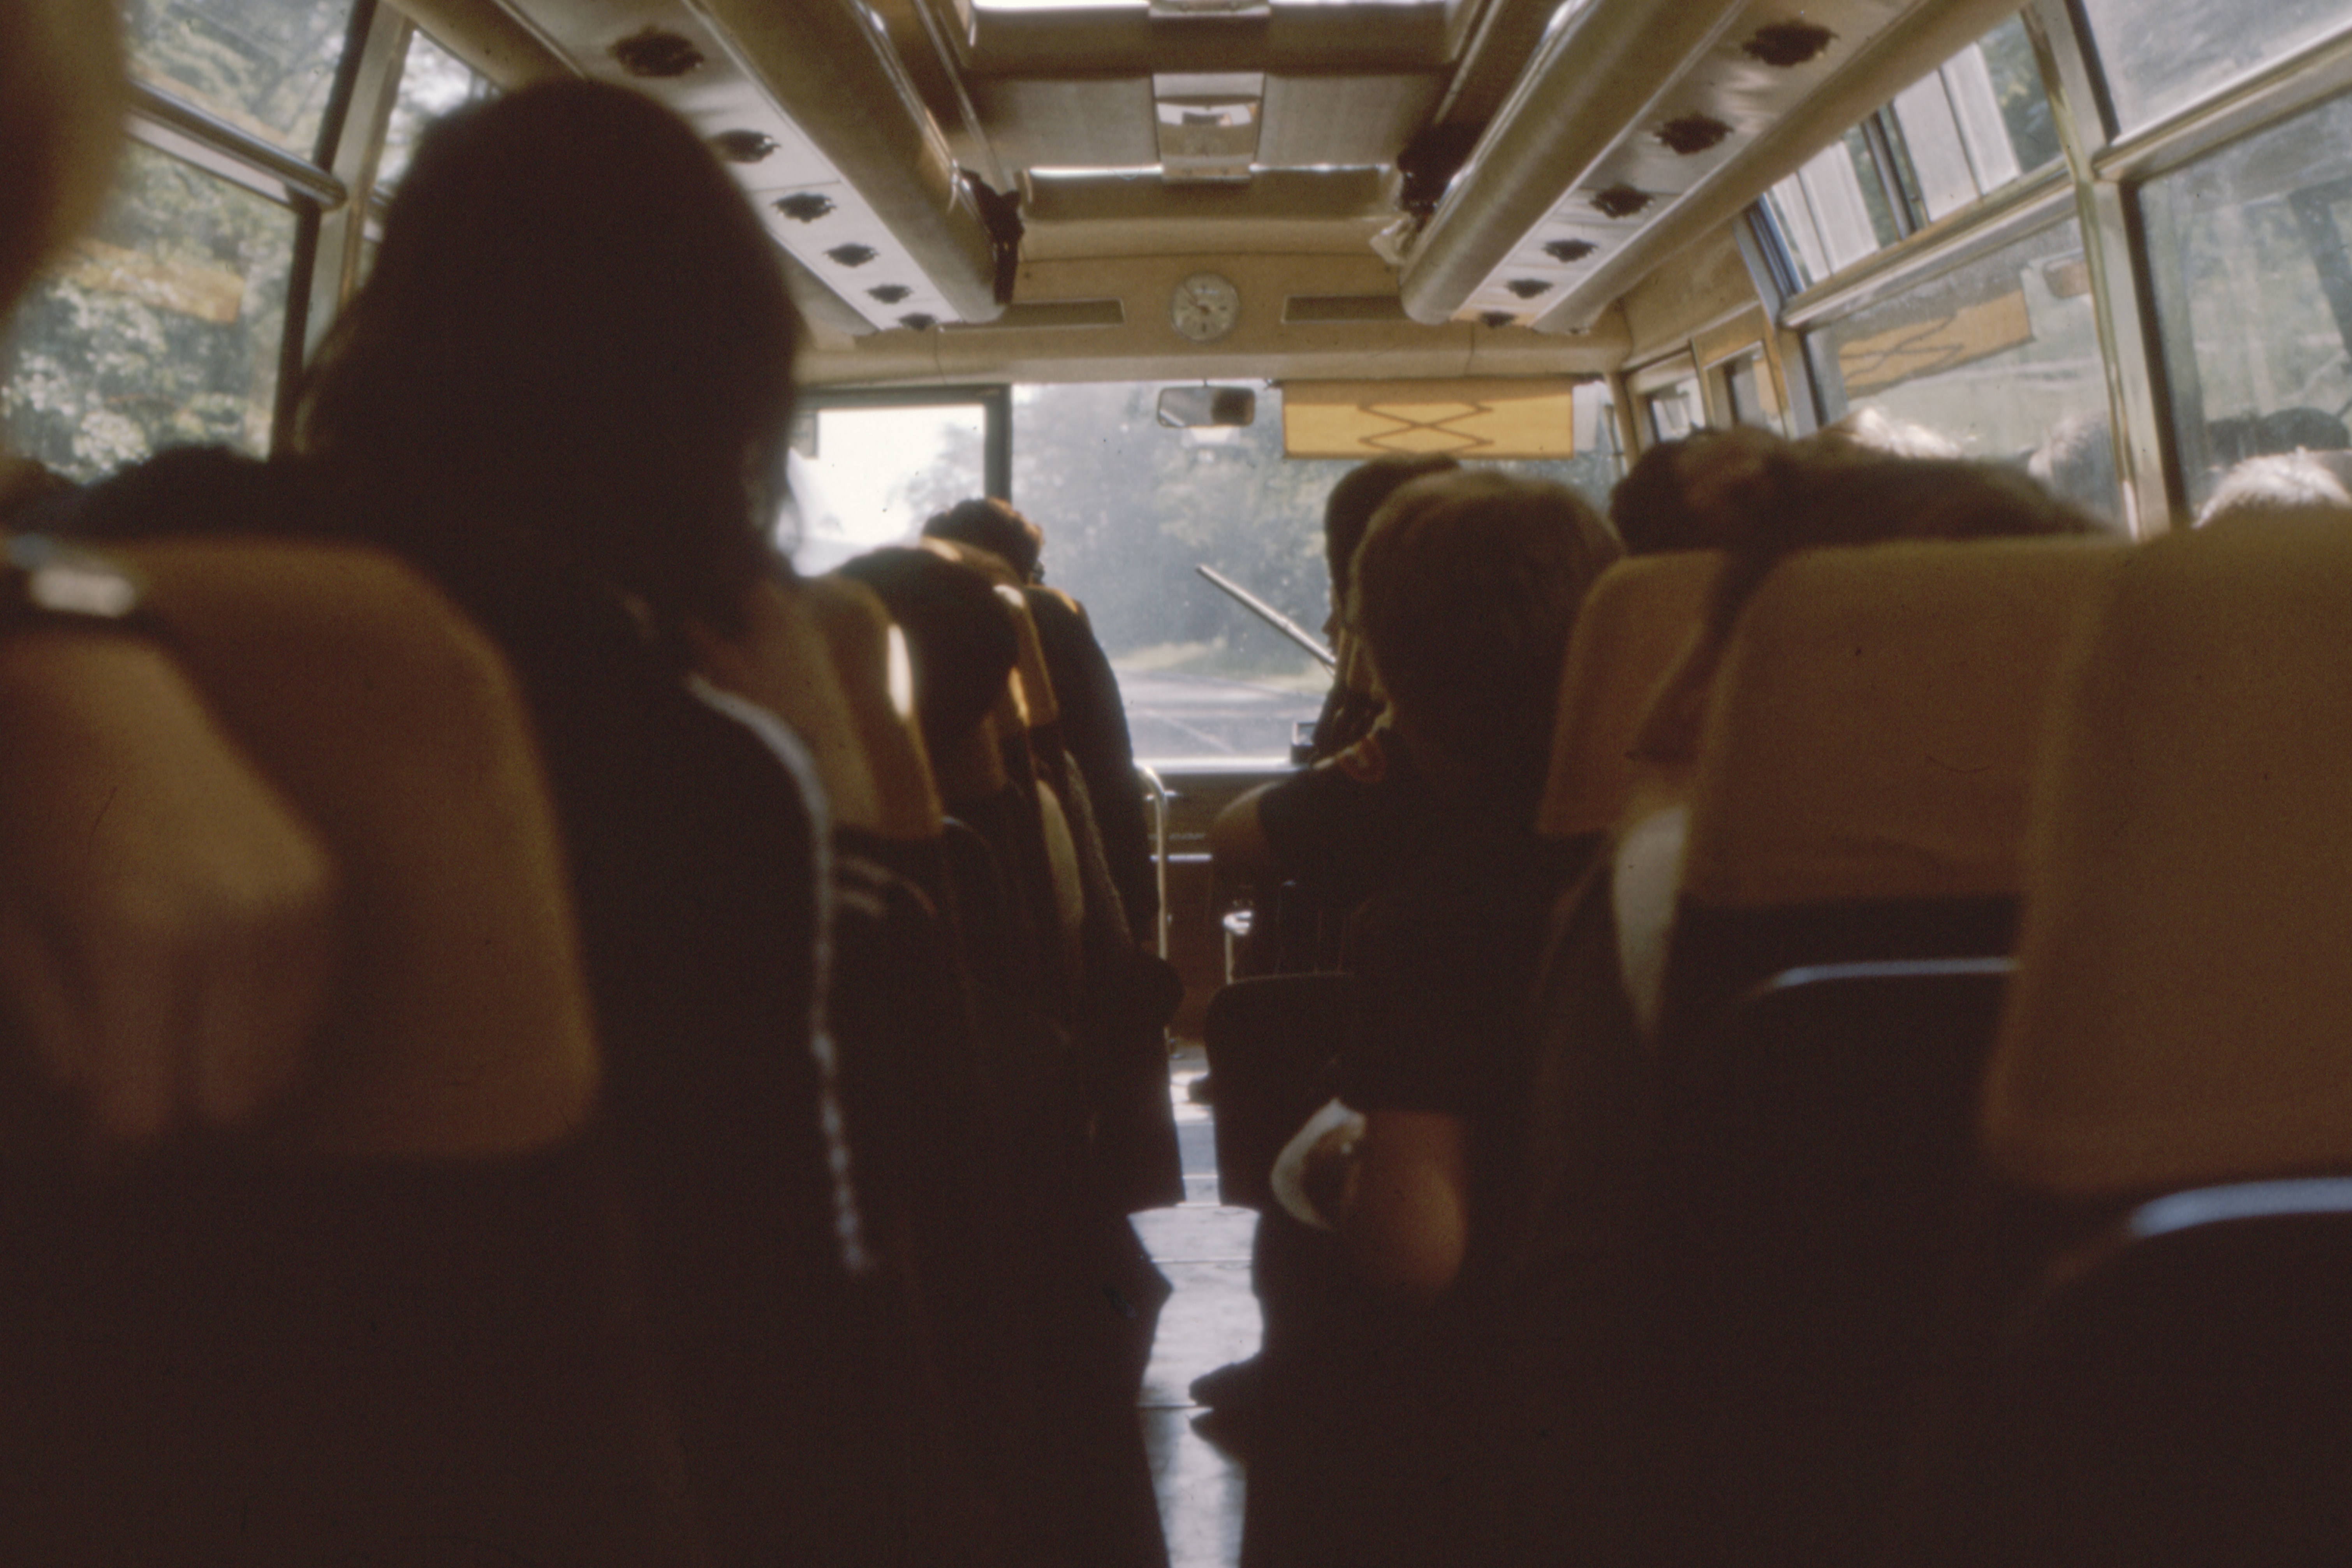 A spacious and fancy charter bus interior